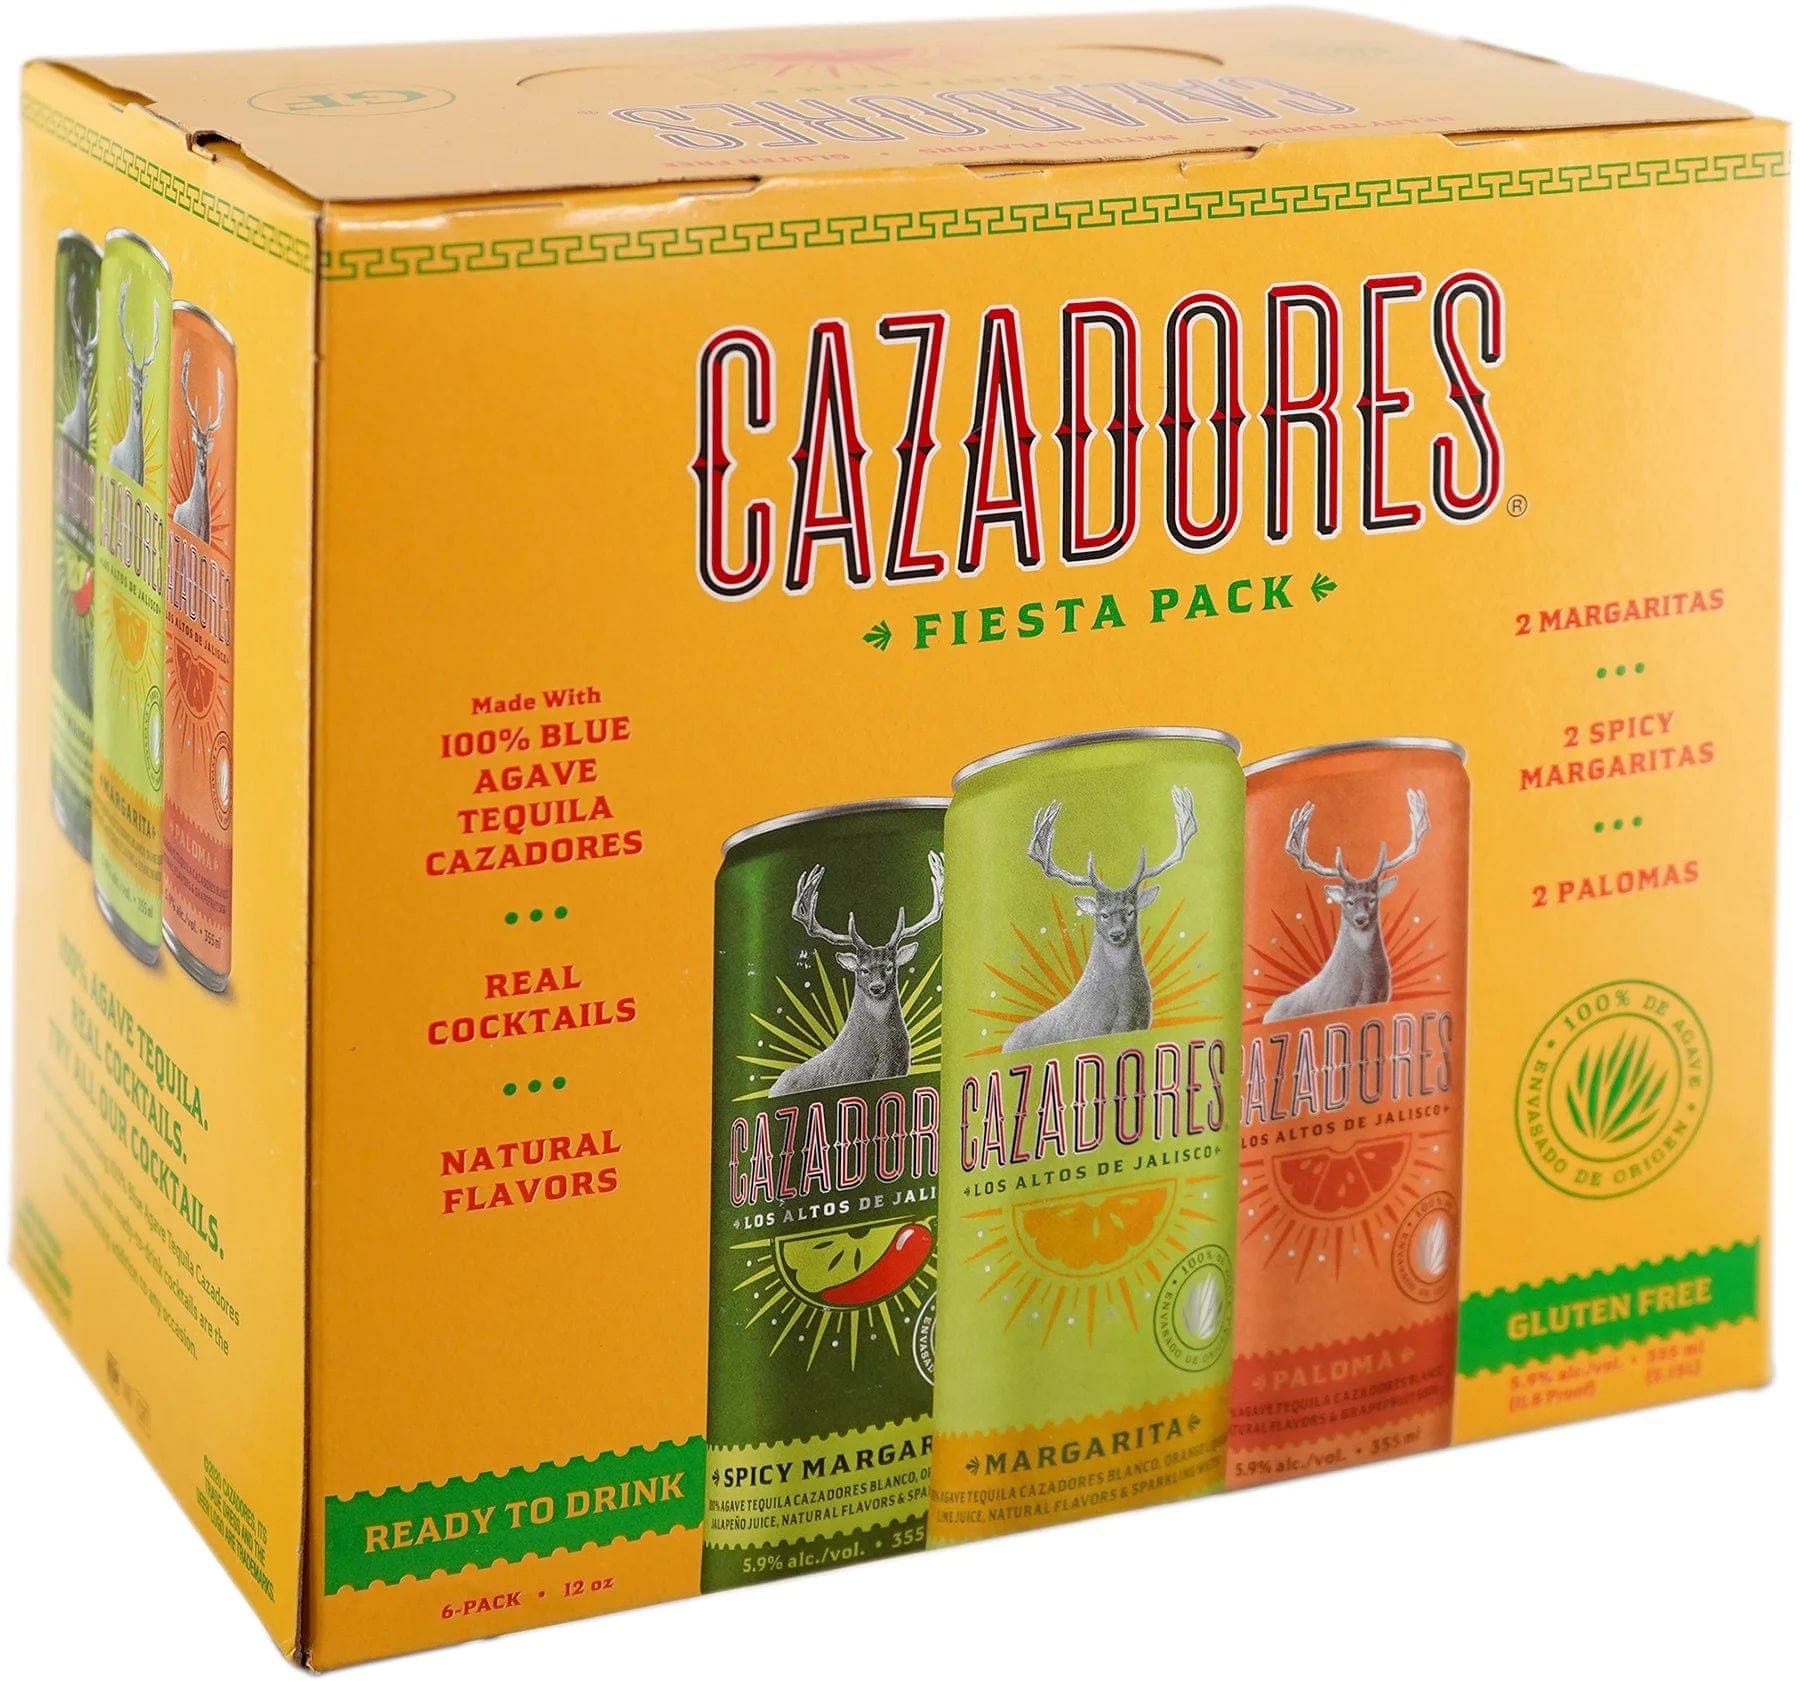 Cazadores Fiesta Pack - 6 Pack - Barbank